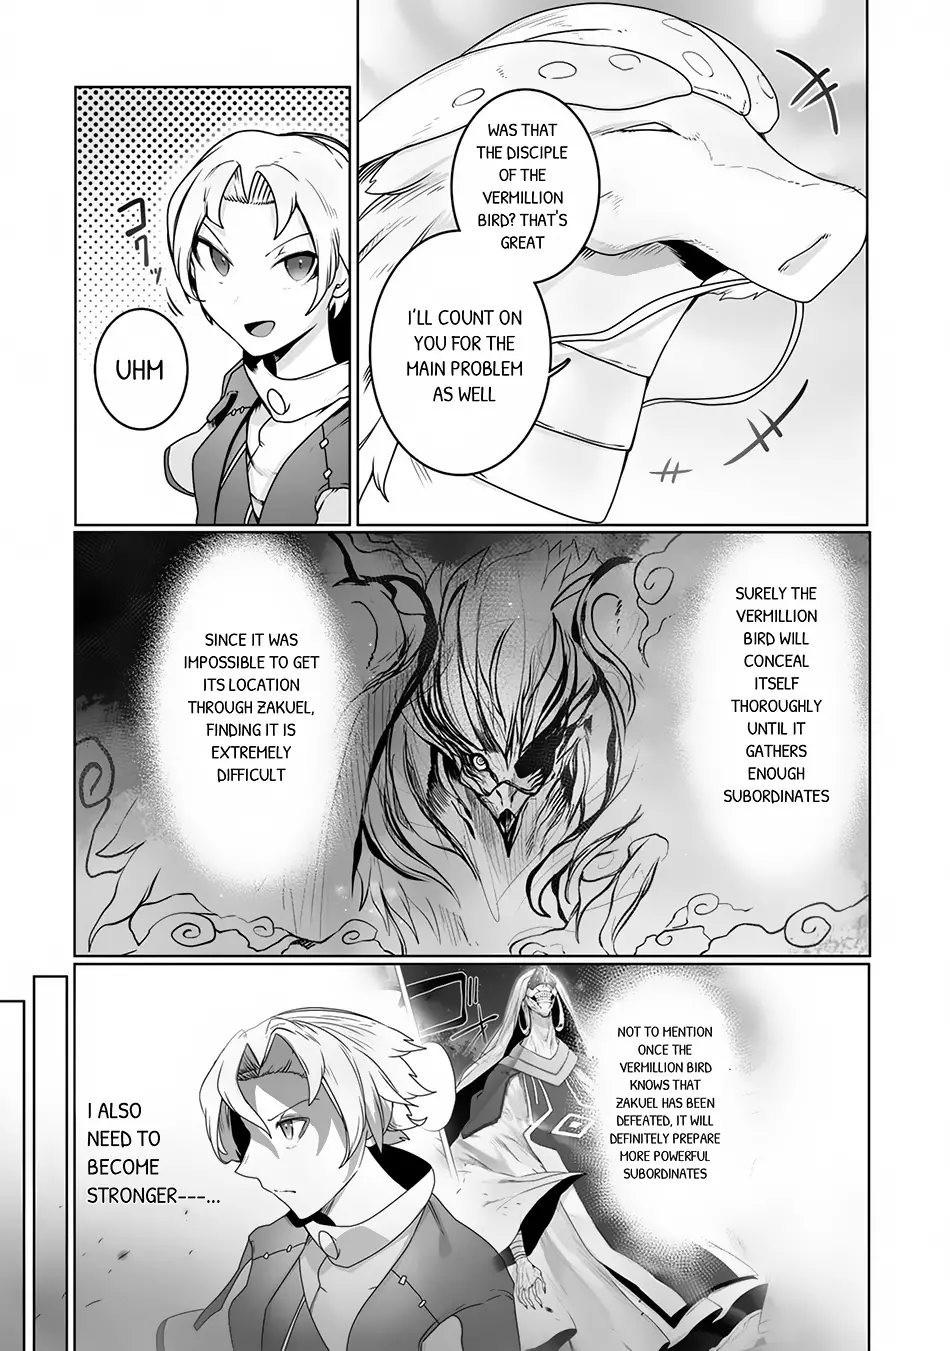 The Useless Tamer Will Turn Into The Top Unconsciously By My Previous Life Knowledge - 20 page 12-a4b71fe9